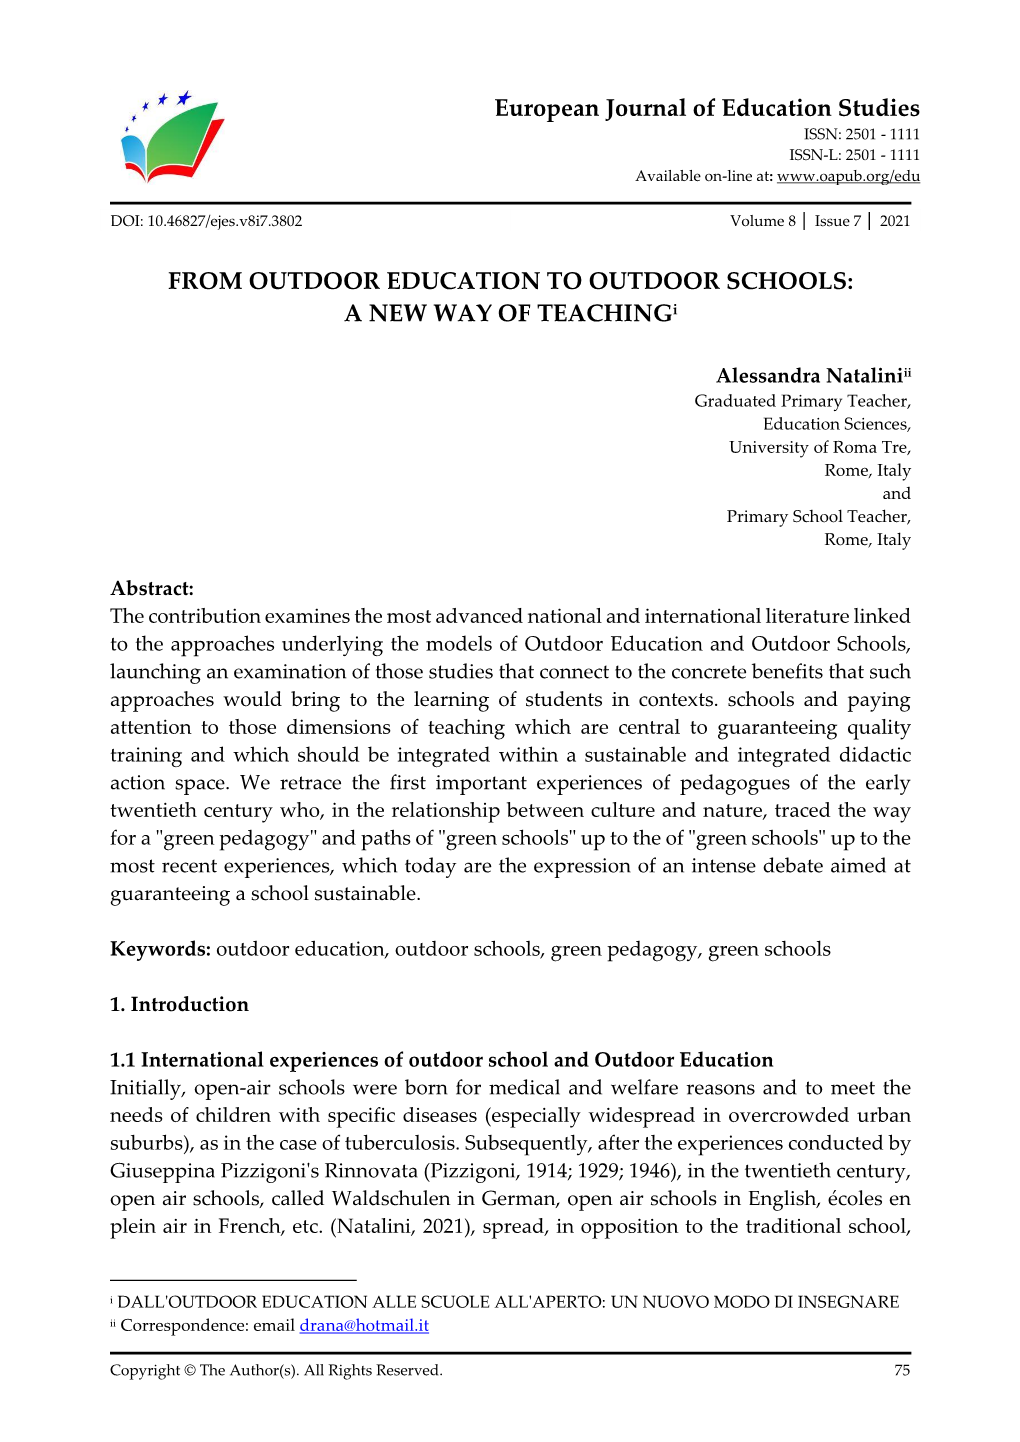 European Journal of Education Studies from OUTDOOR